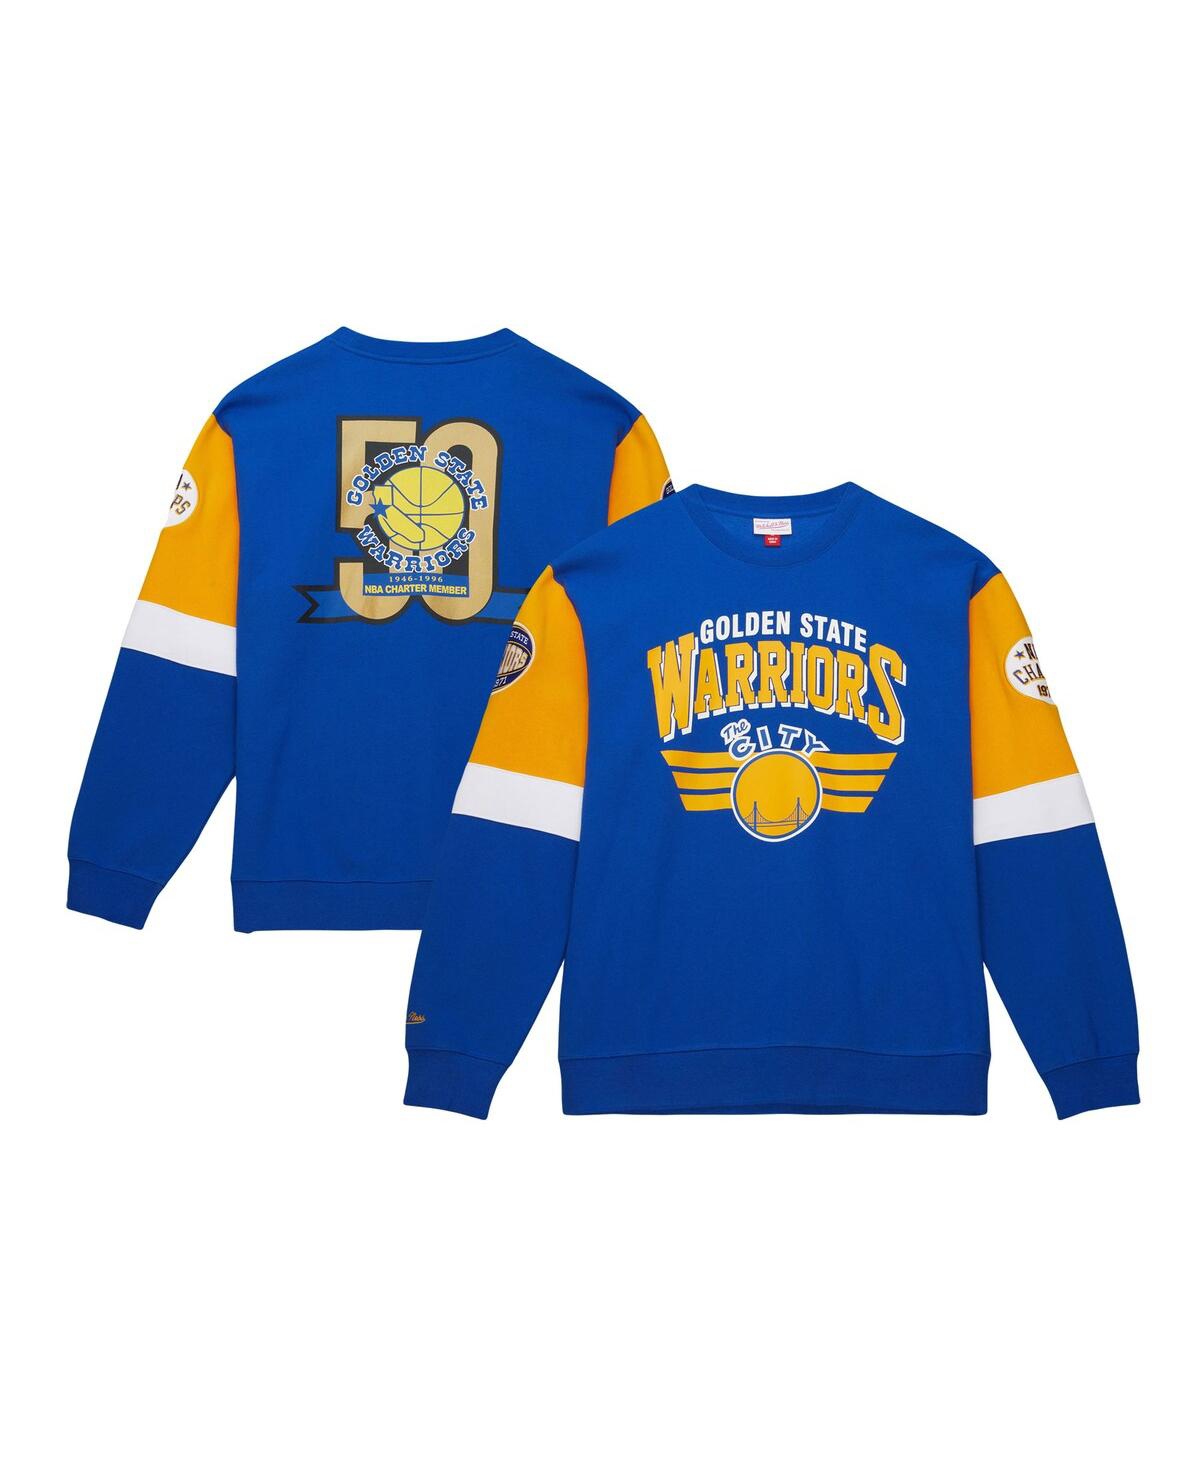 Mitchell & Ness Men's  Royal Distressed Golden State Warriors Hardwood Classics Vintage-like All Over